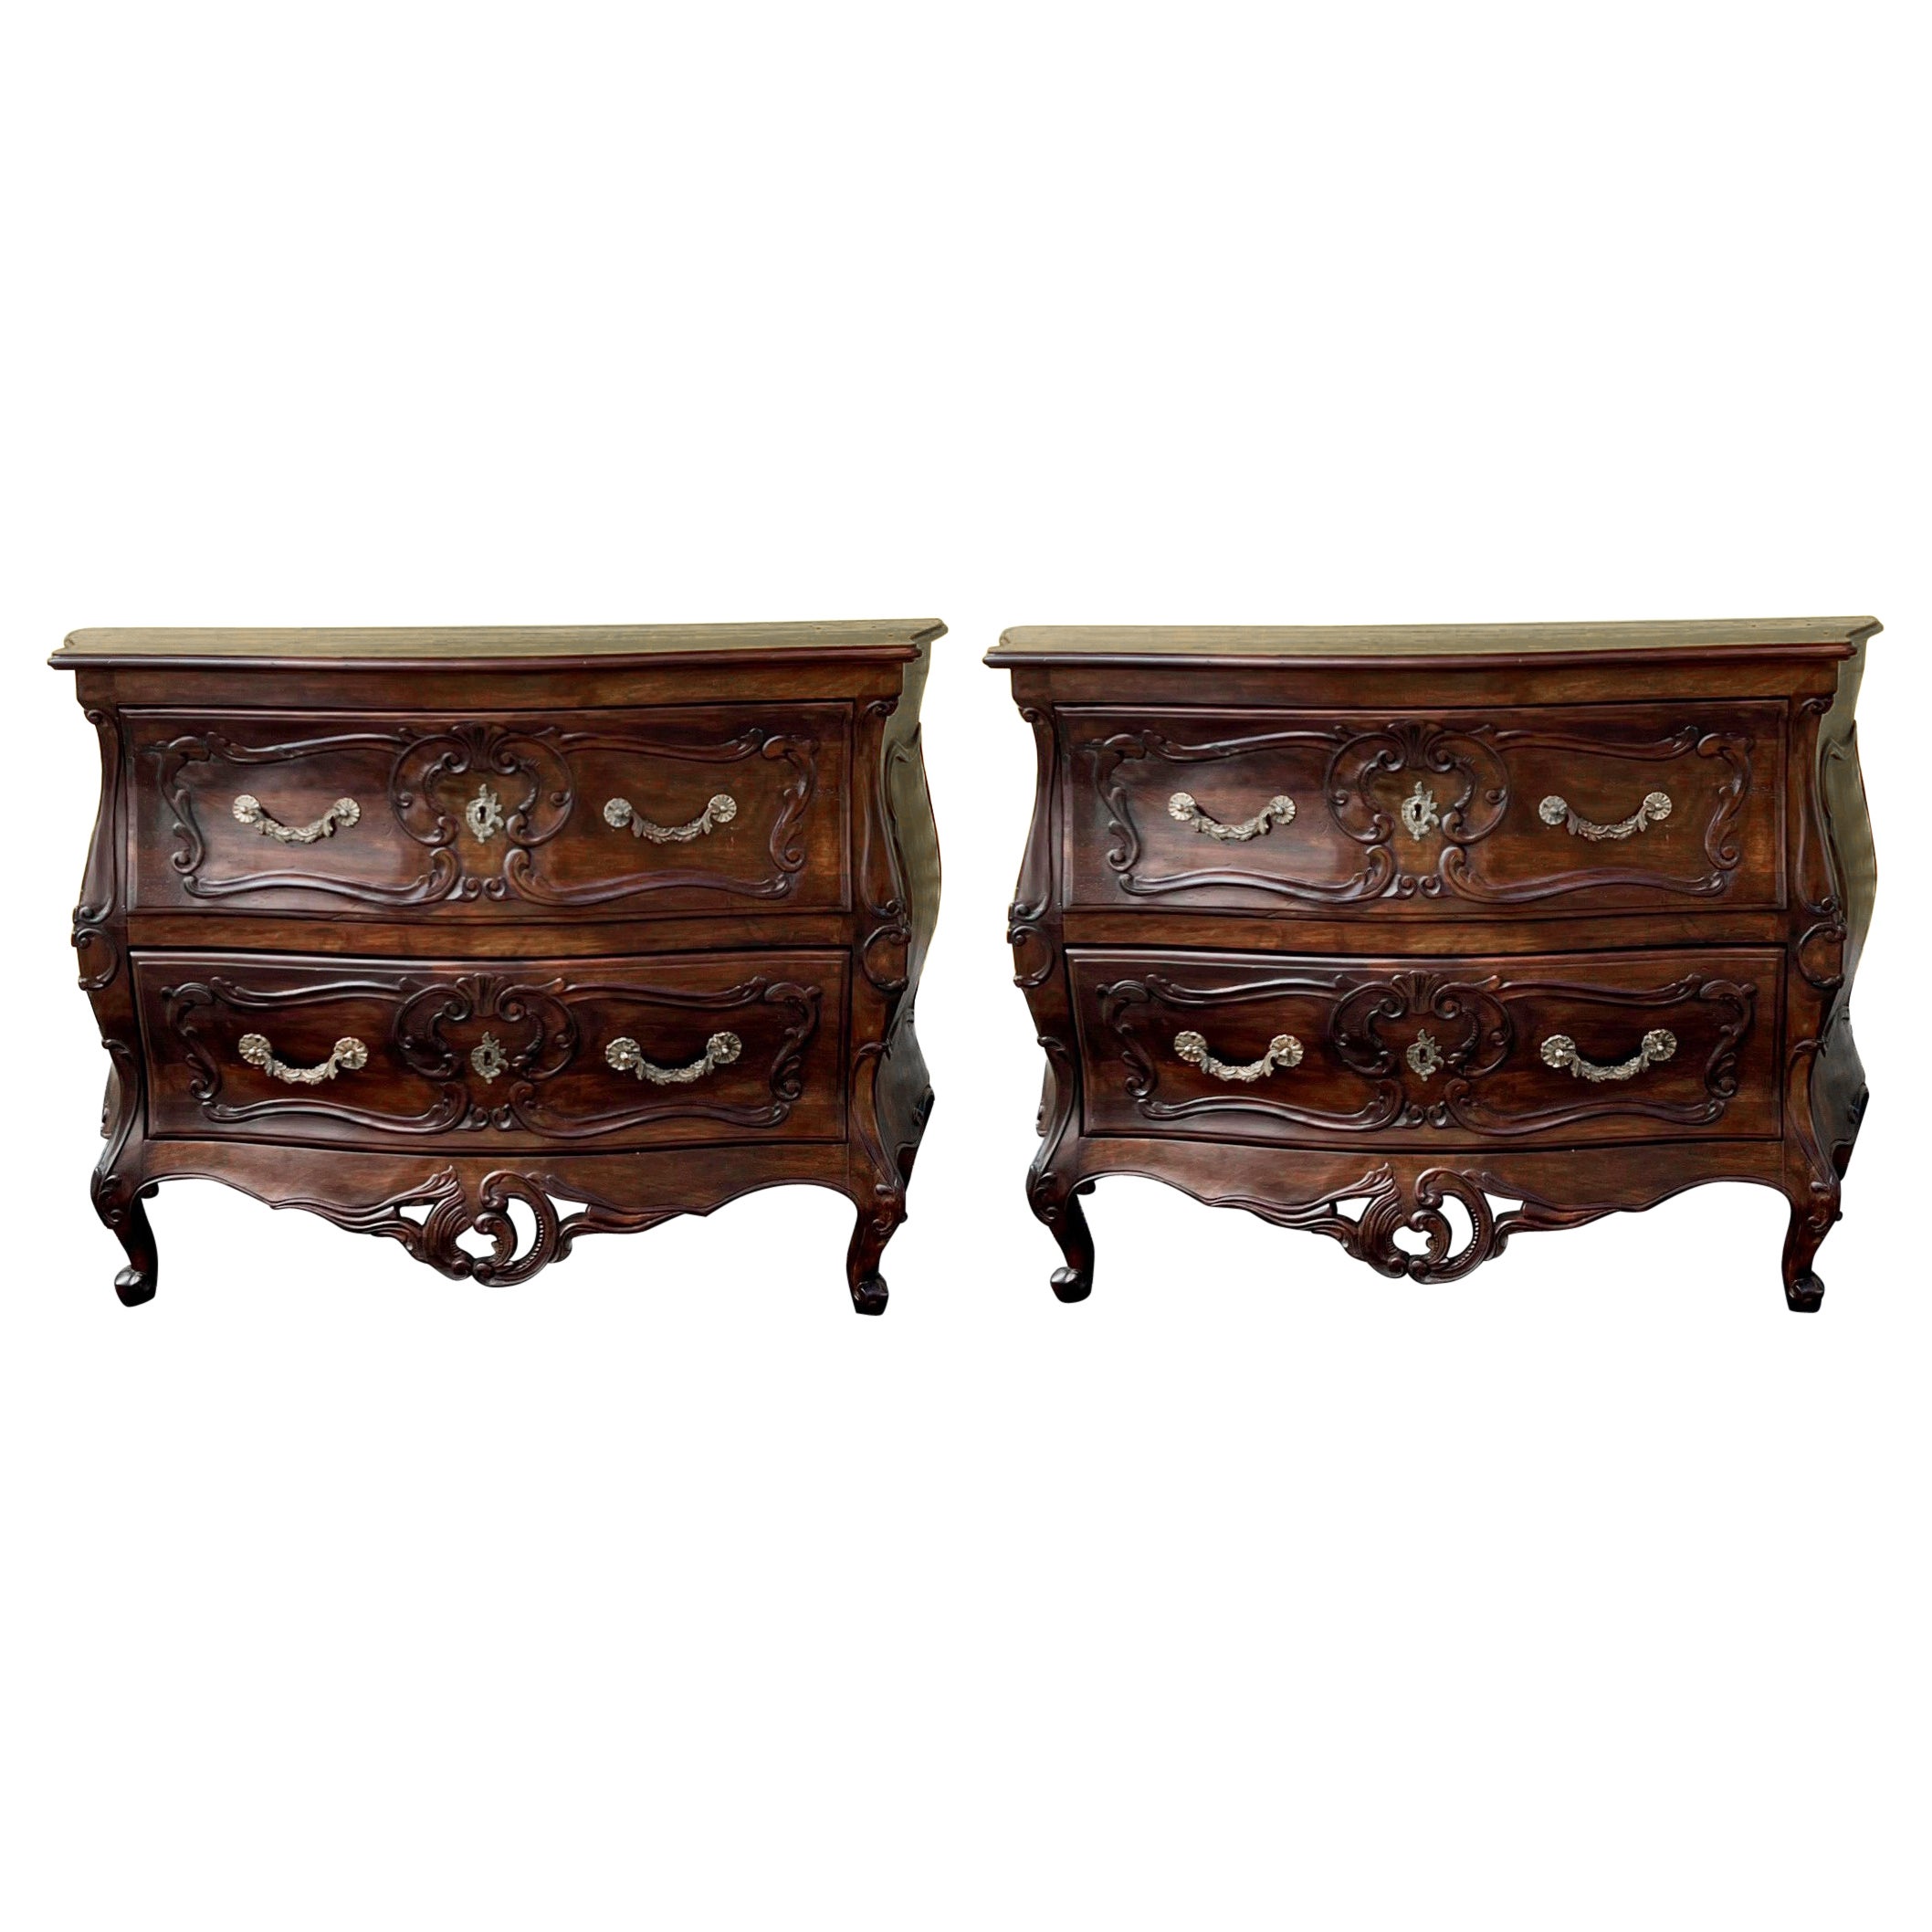 French Louis XV Style Carved Oak Serpentine Commodes / Chest of Drawers, Pair